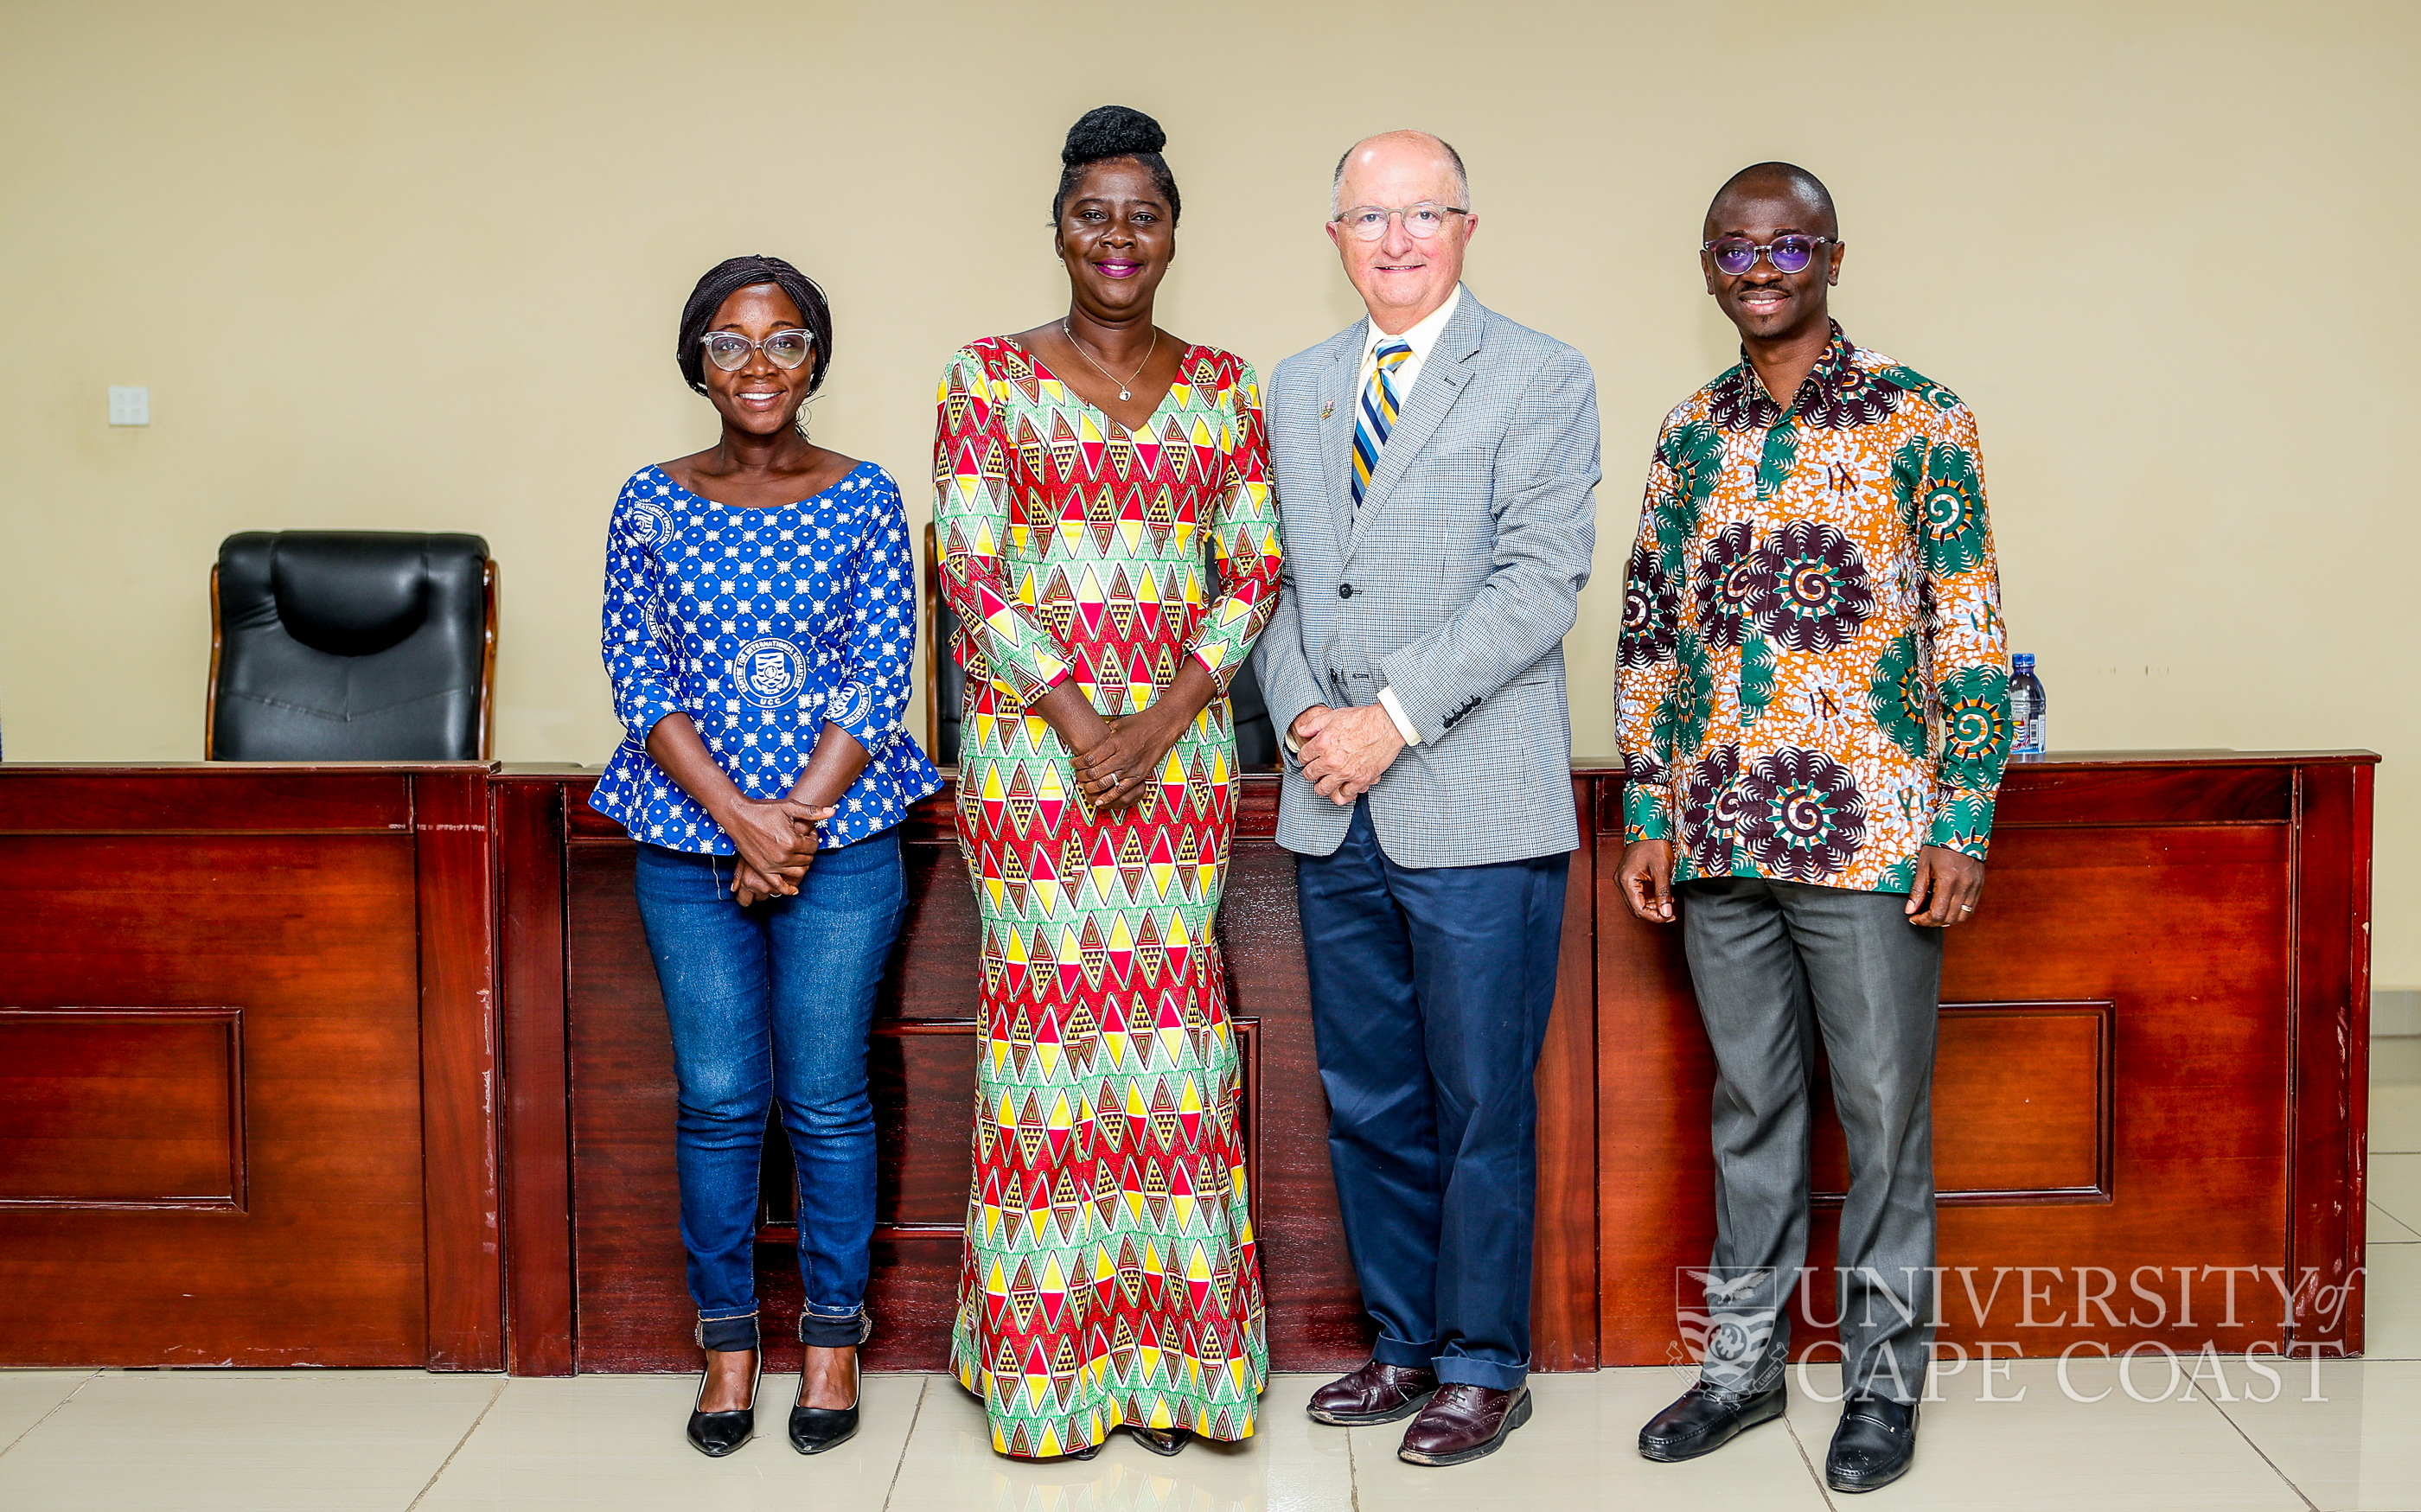 Prof Boohene (2nd from left) and Dr Wingert in a photo with Dr. Bert Boadi Kusi (right)